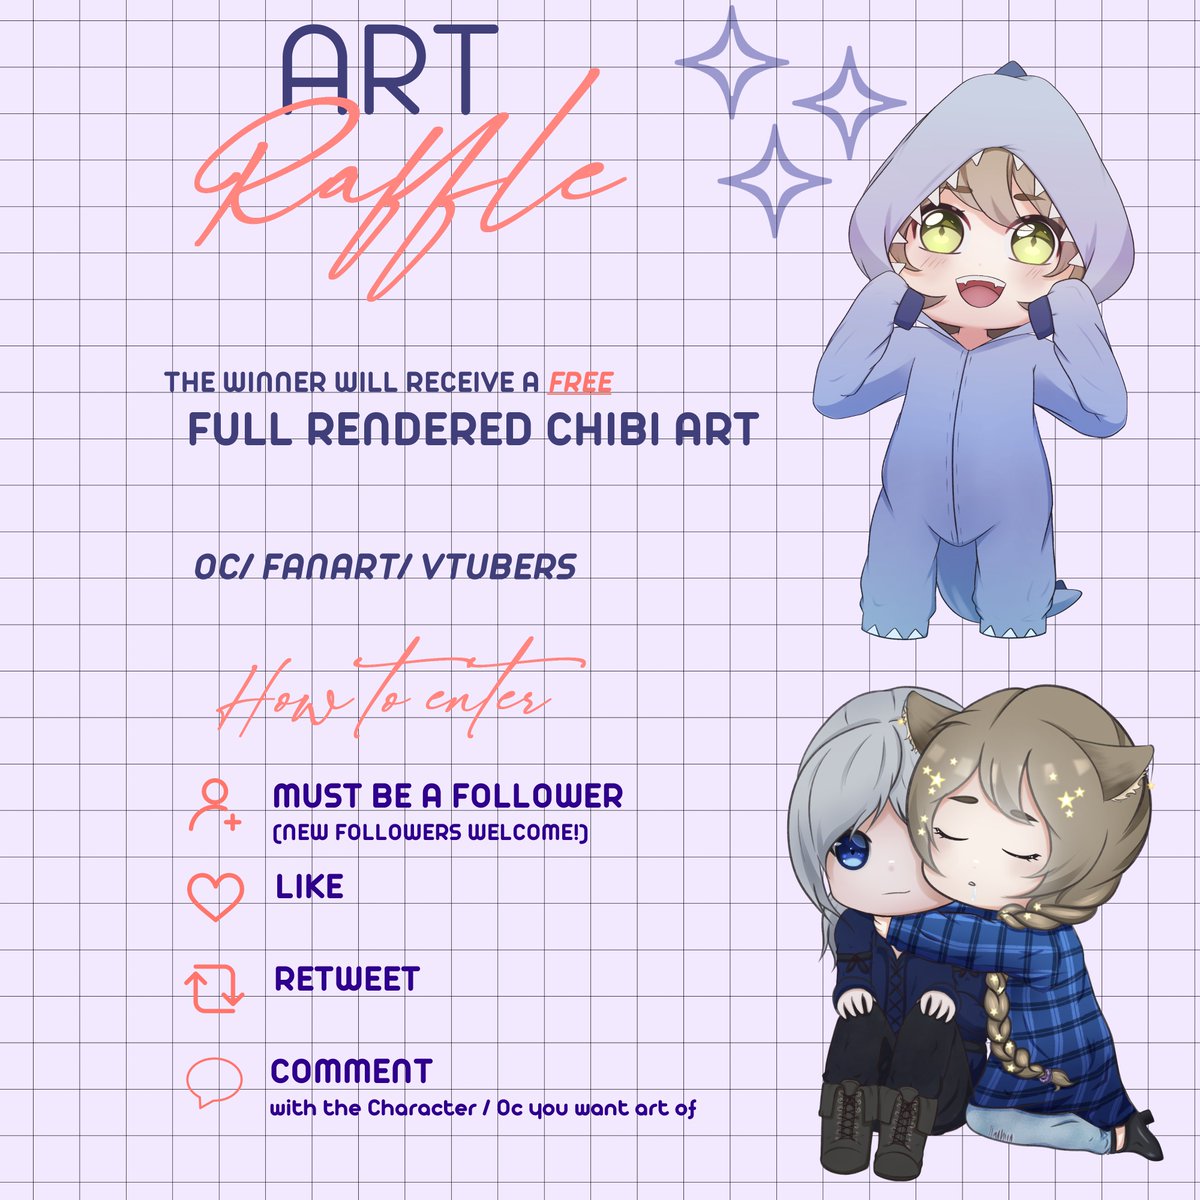 ✨ART RAFFLE✨

My 2. raffle! Chat unlocked this raffle at the horror night, so here we go! 

How to enter: 
1. Follow (new follower are wlecome)
2. Like
3. retweet
4. comment the character (Optional)

ends June 27

#Vtubers #GERVtuber #DigitalArtist #artmoots #artraffle